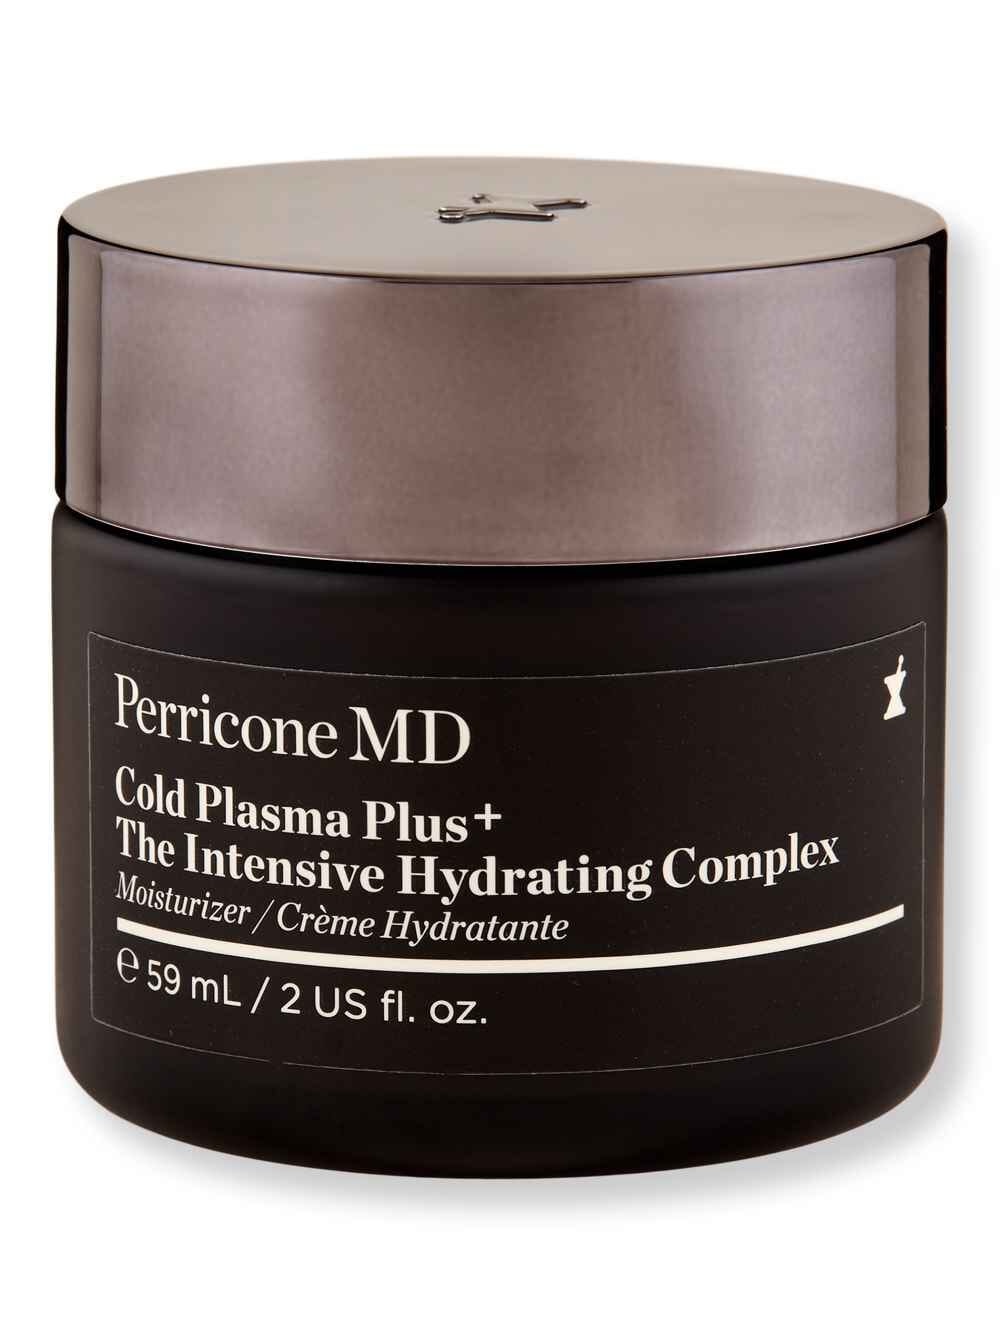 Perricone MD Perricone MD Cold Plasma Plus+ The Intensive Hydrating Complex 2 oz59 ml Face Moisturizers 